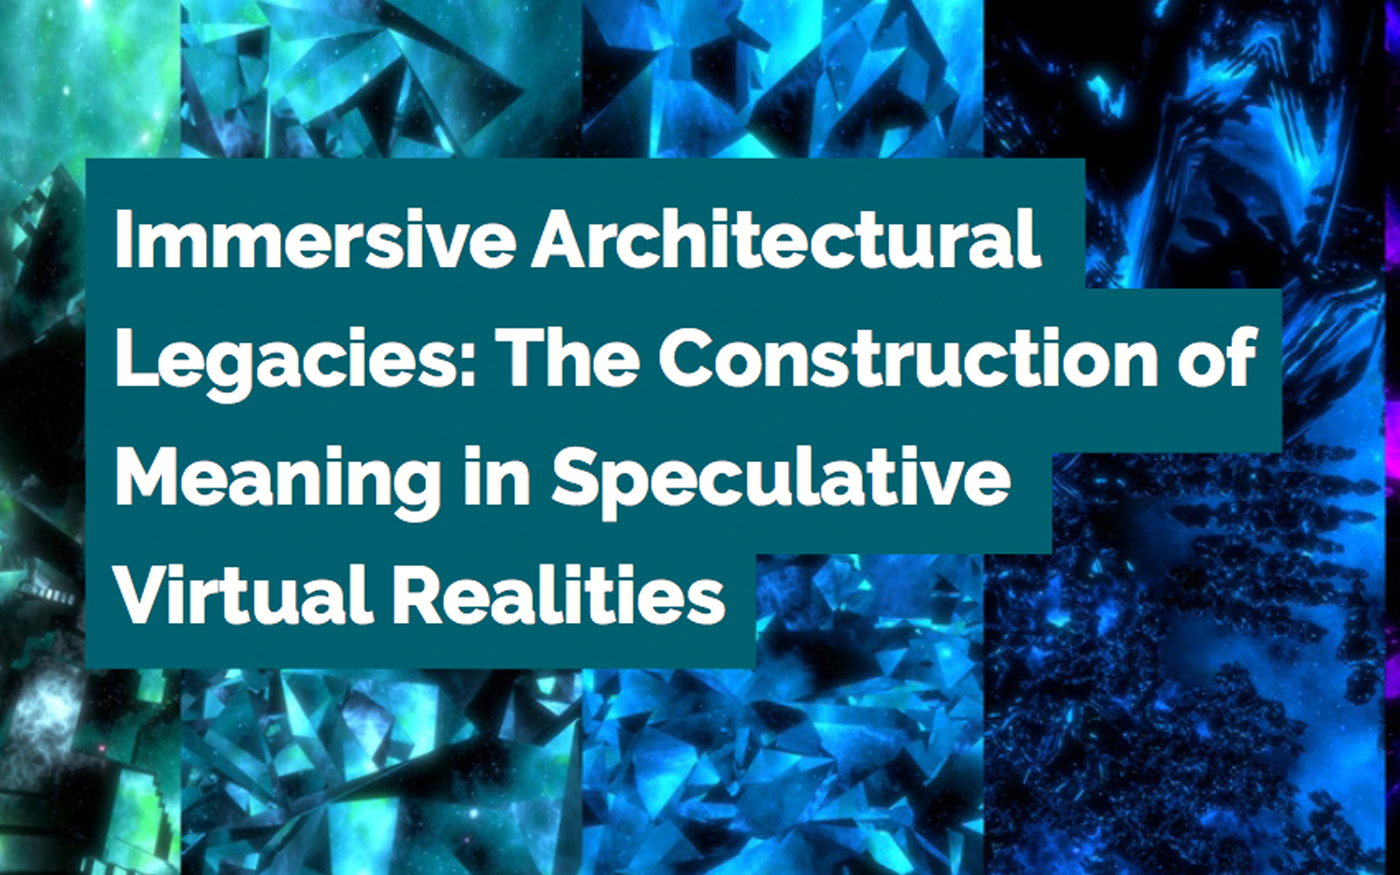 Immersive Architectural Legacies: The Construction of Meaning in Speculative Virtual Realities